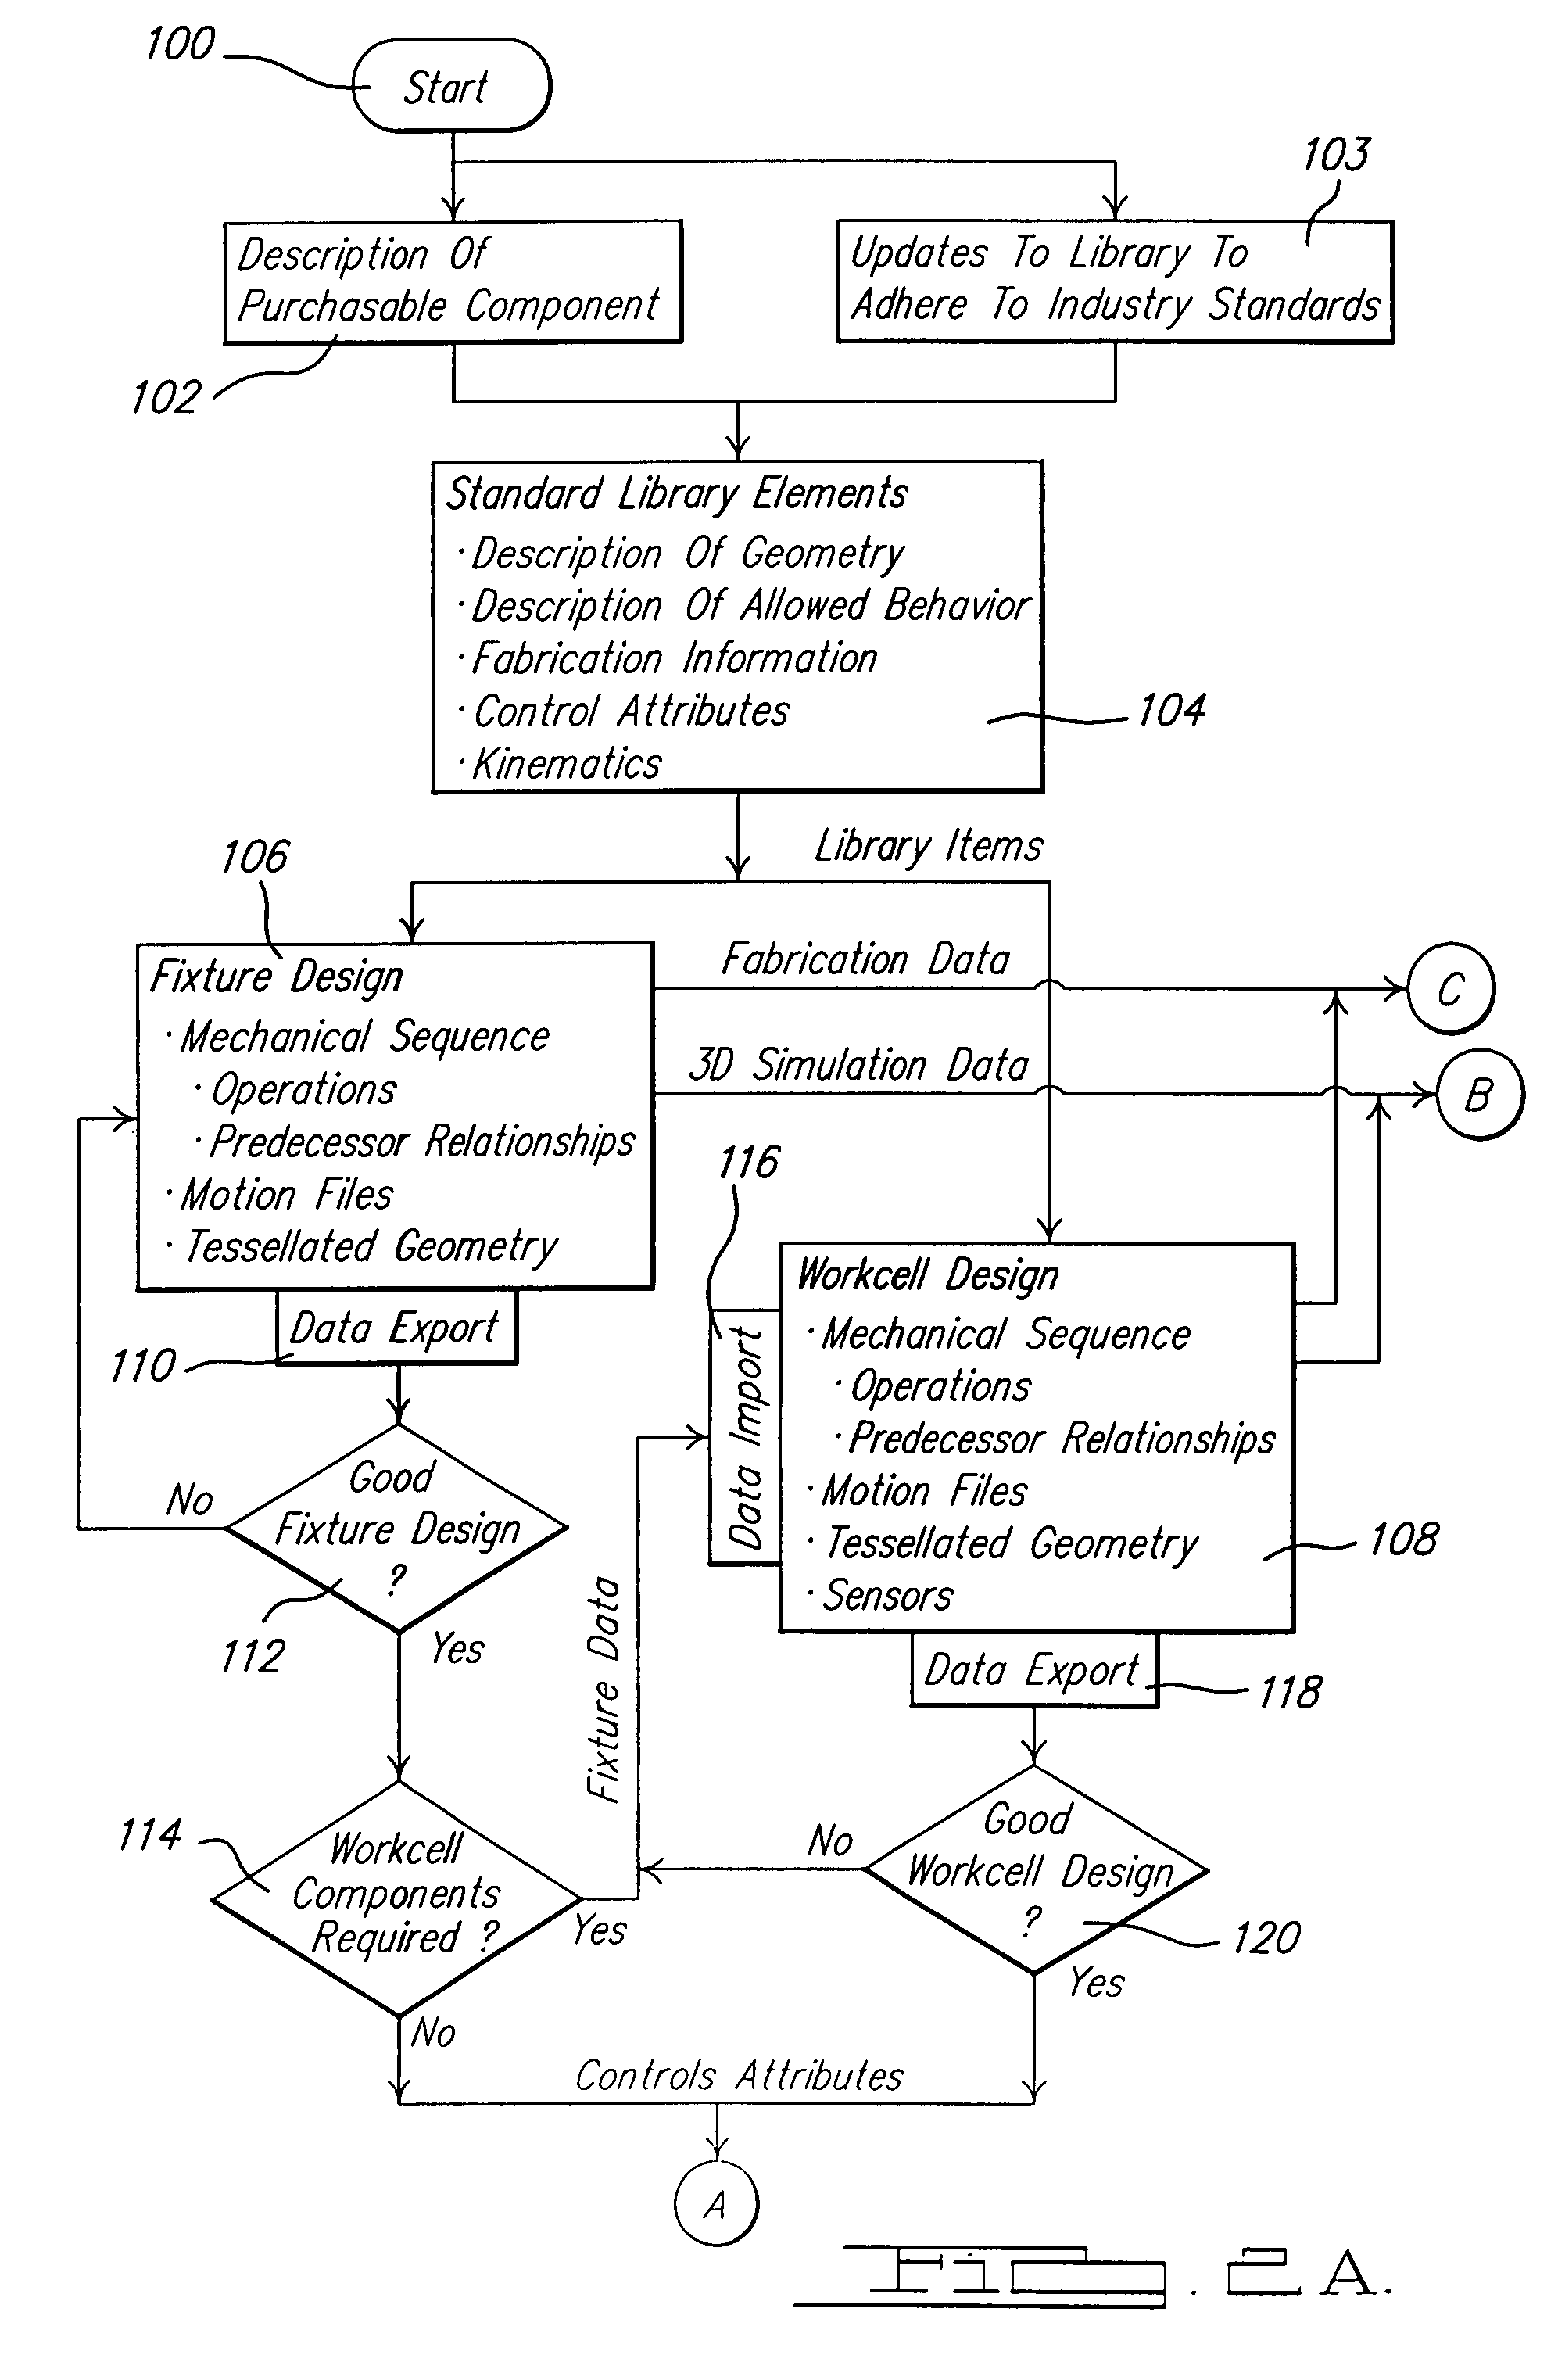 Method of embedding tooling control data within mechanical fixture design to enable programmable logic control verification simulation